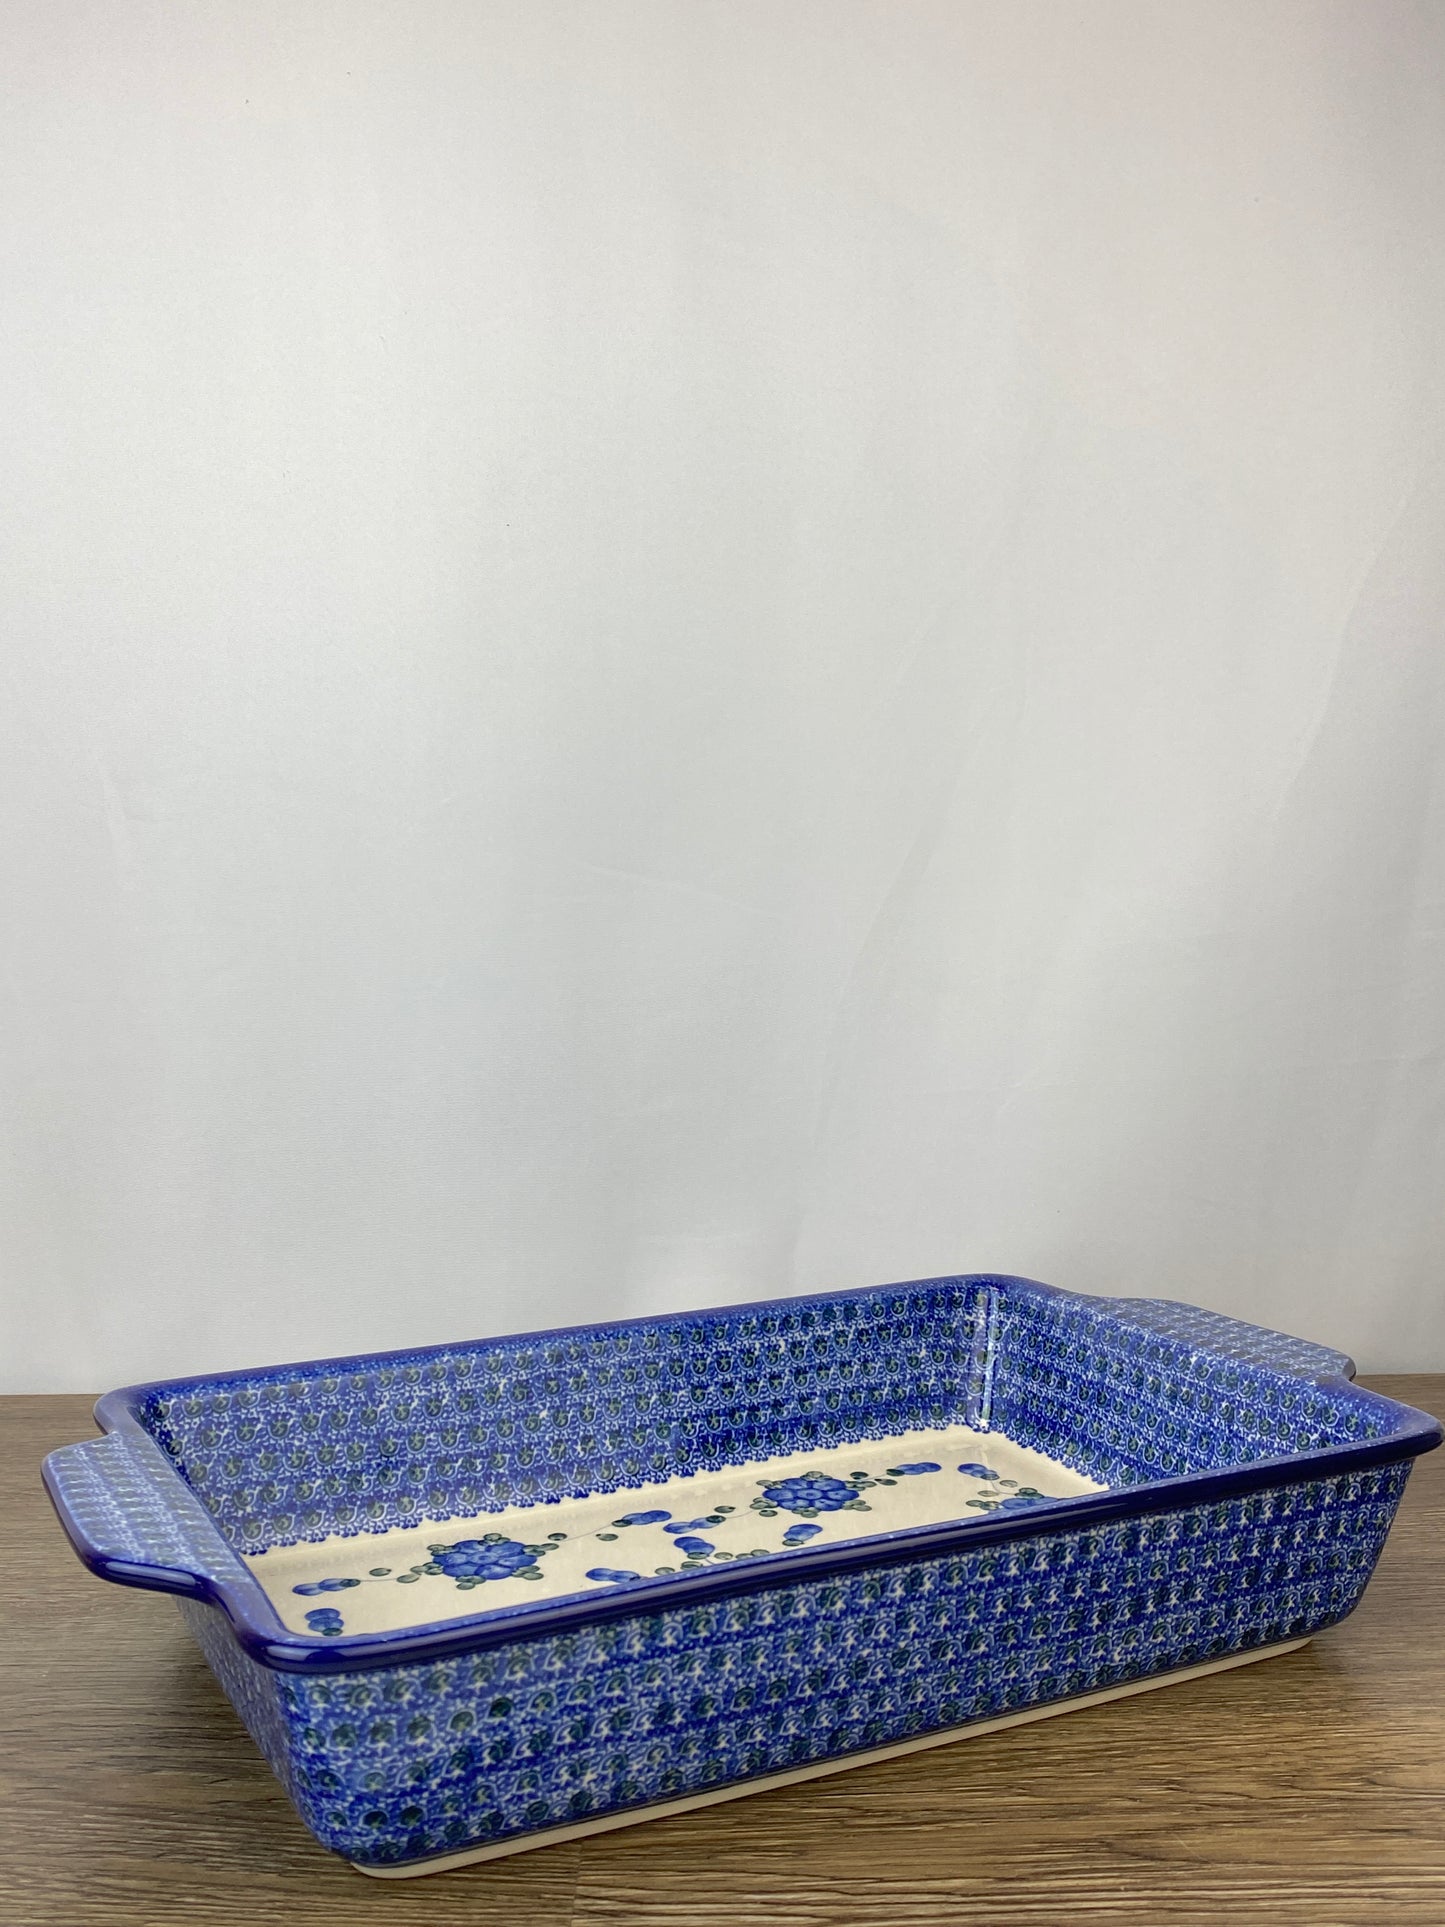 Large Rectangular Baker with Handles - Shape A56 - Pattern 163